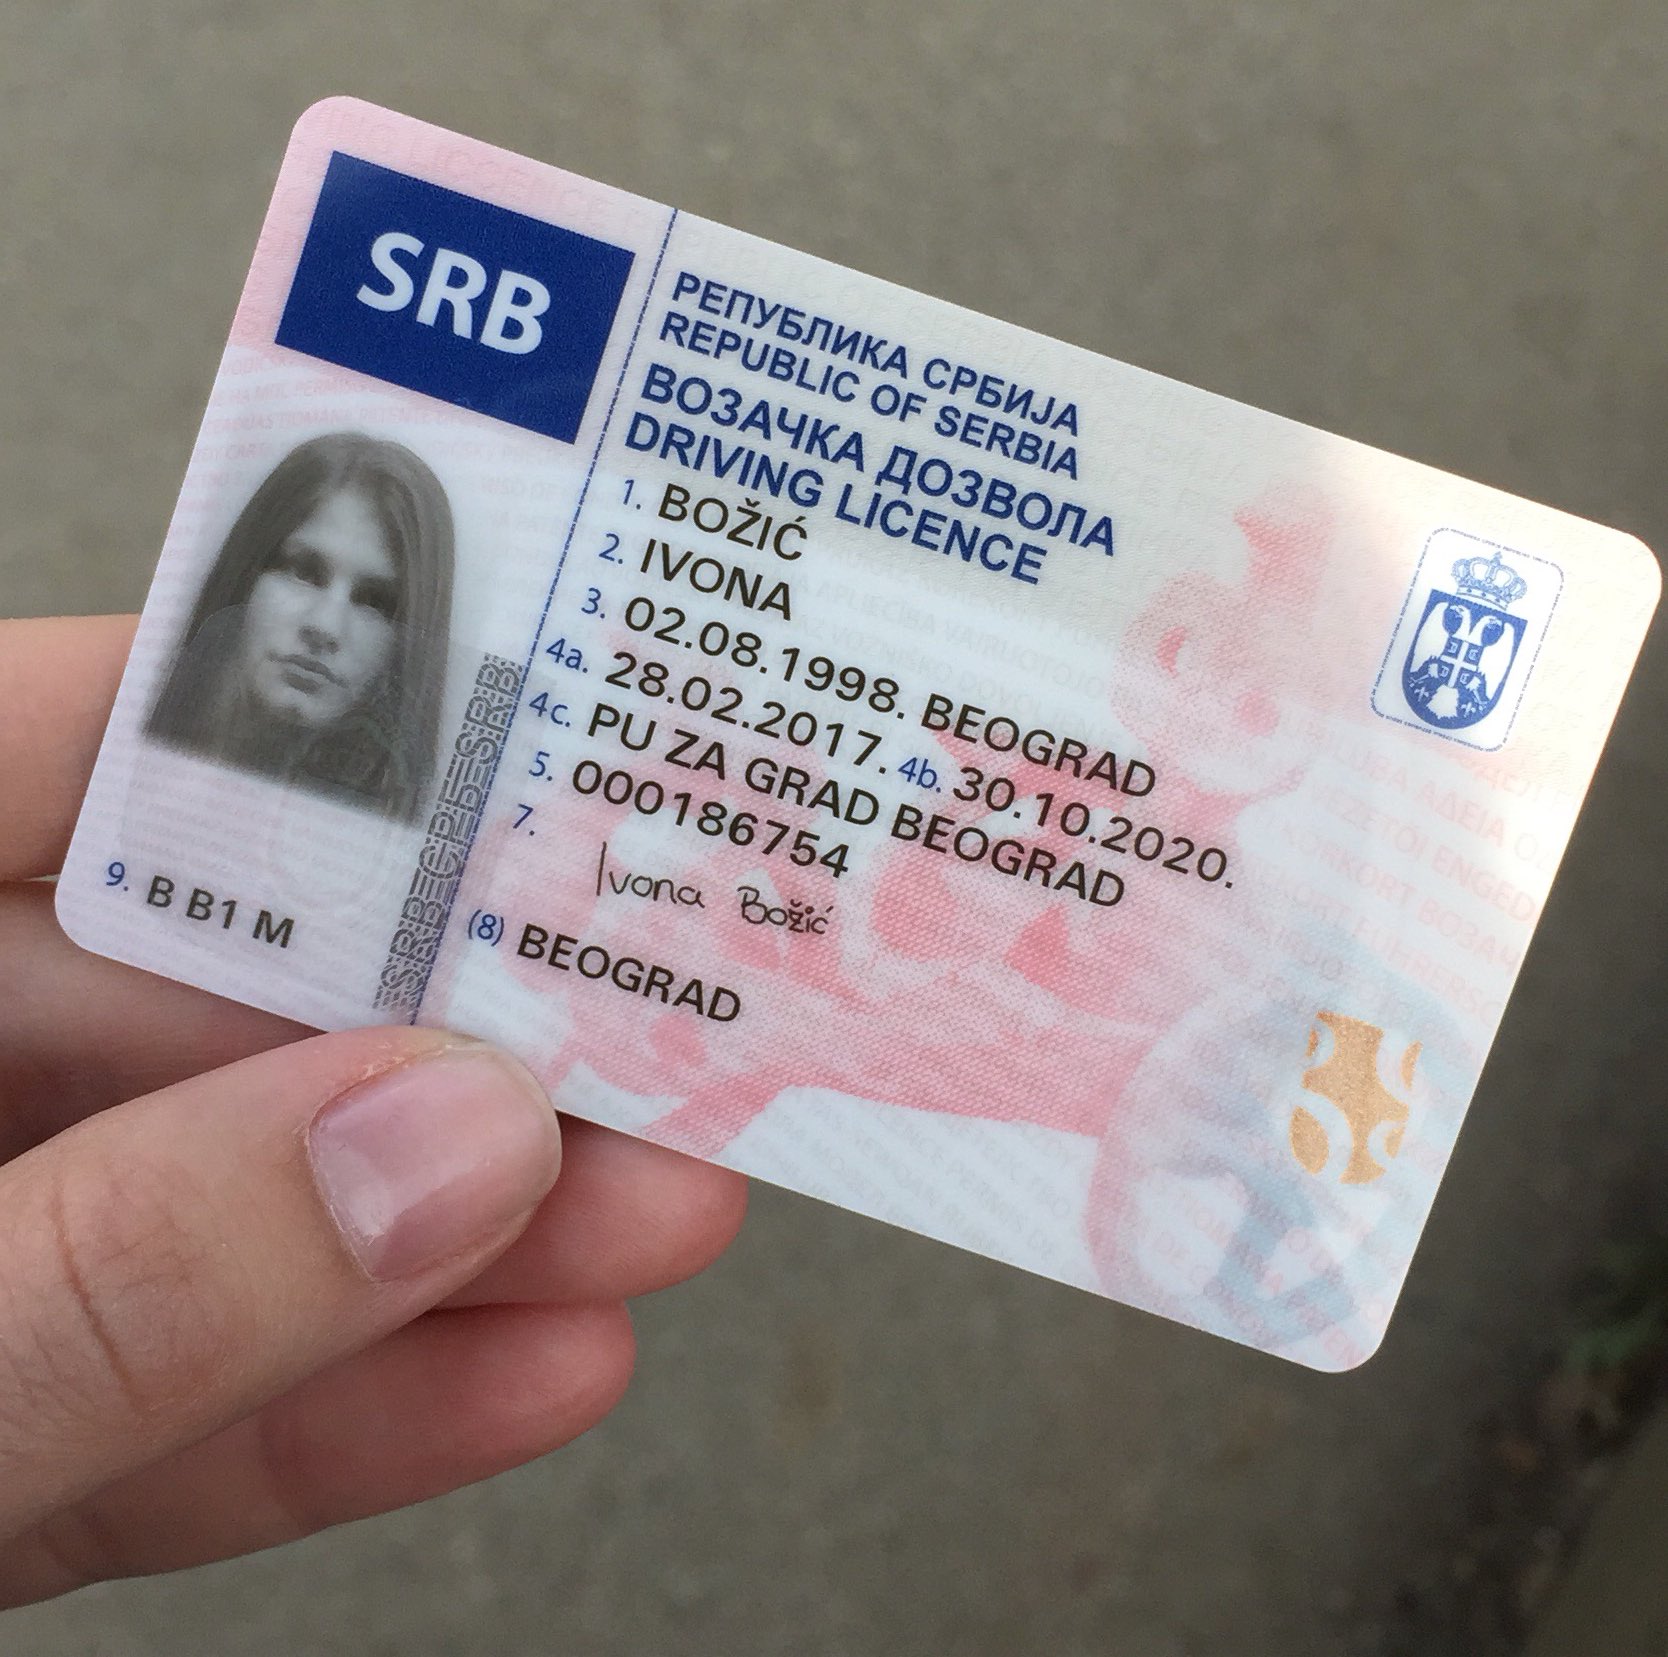 do you need an international driver's license in serbia